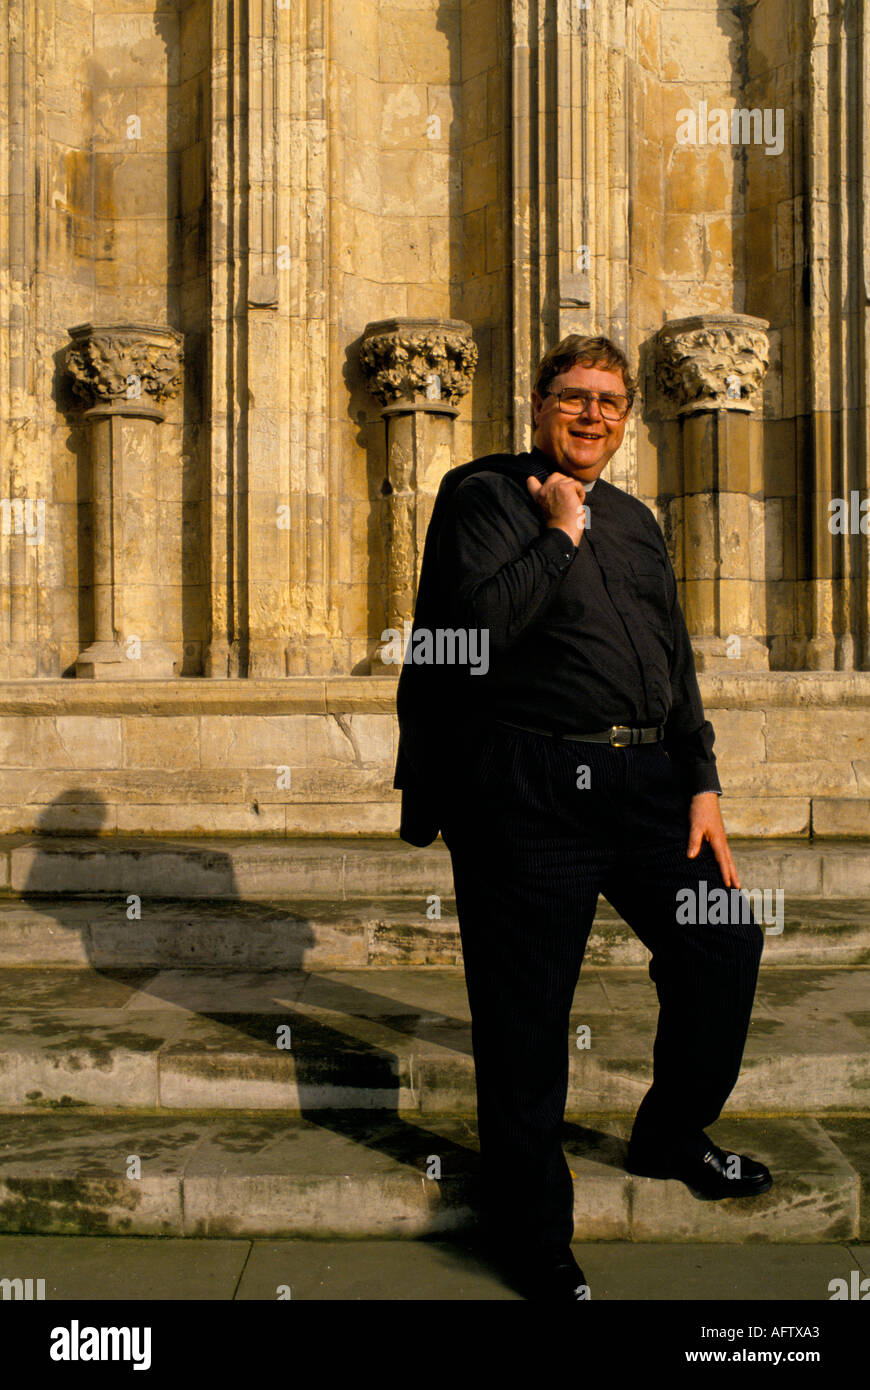 Dr George Austin the Archdeacon of York who is against the ordination of women to the Priesthood. 1990s York Minster. Uk HOMER SYKES Stock Photo